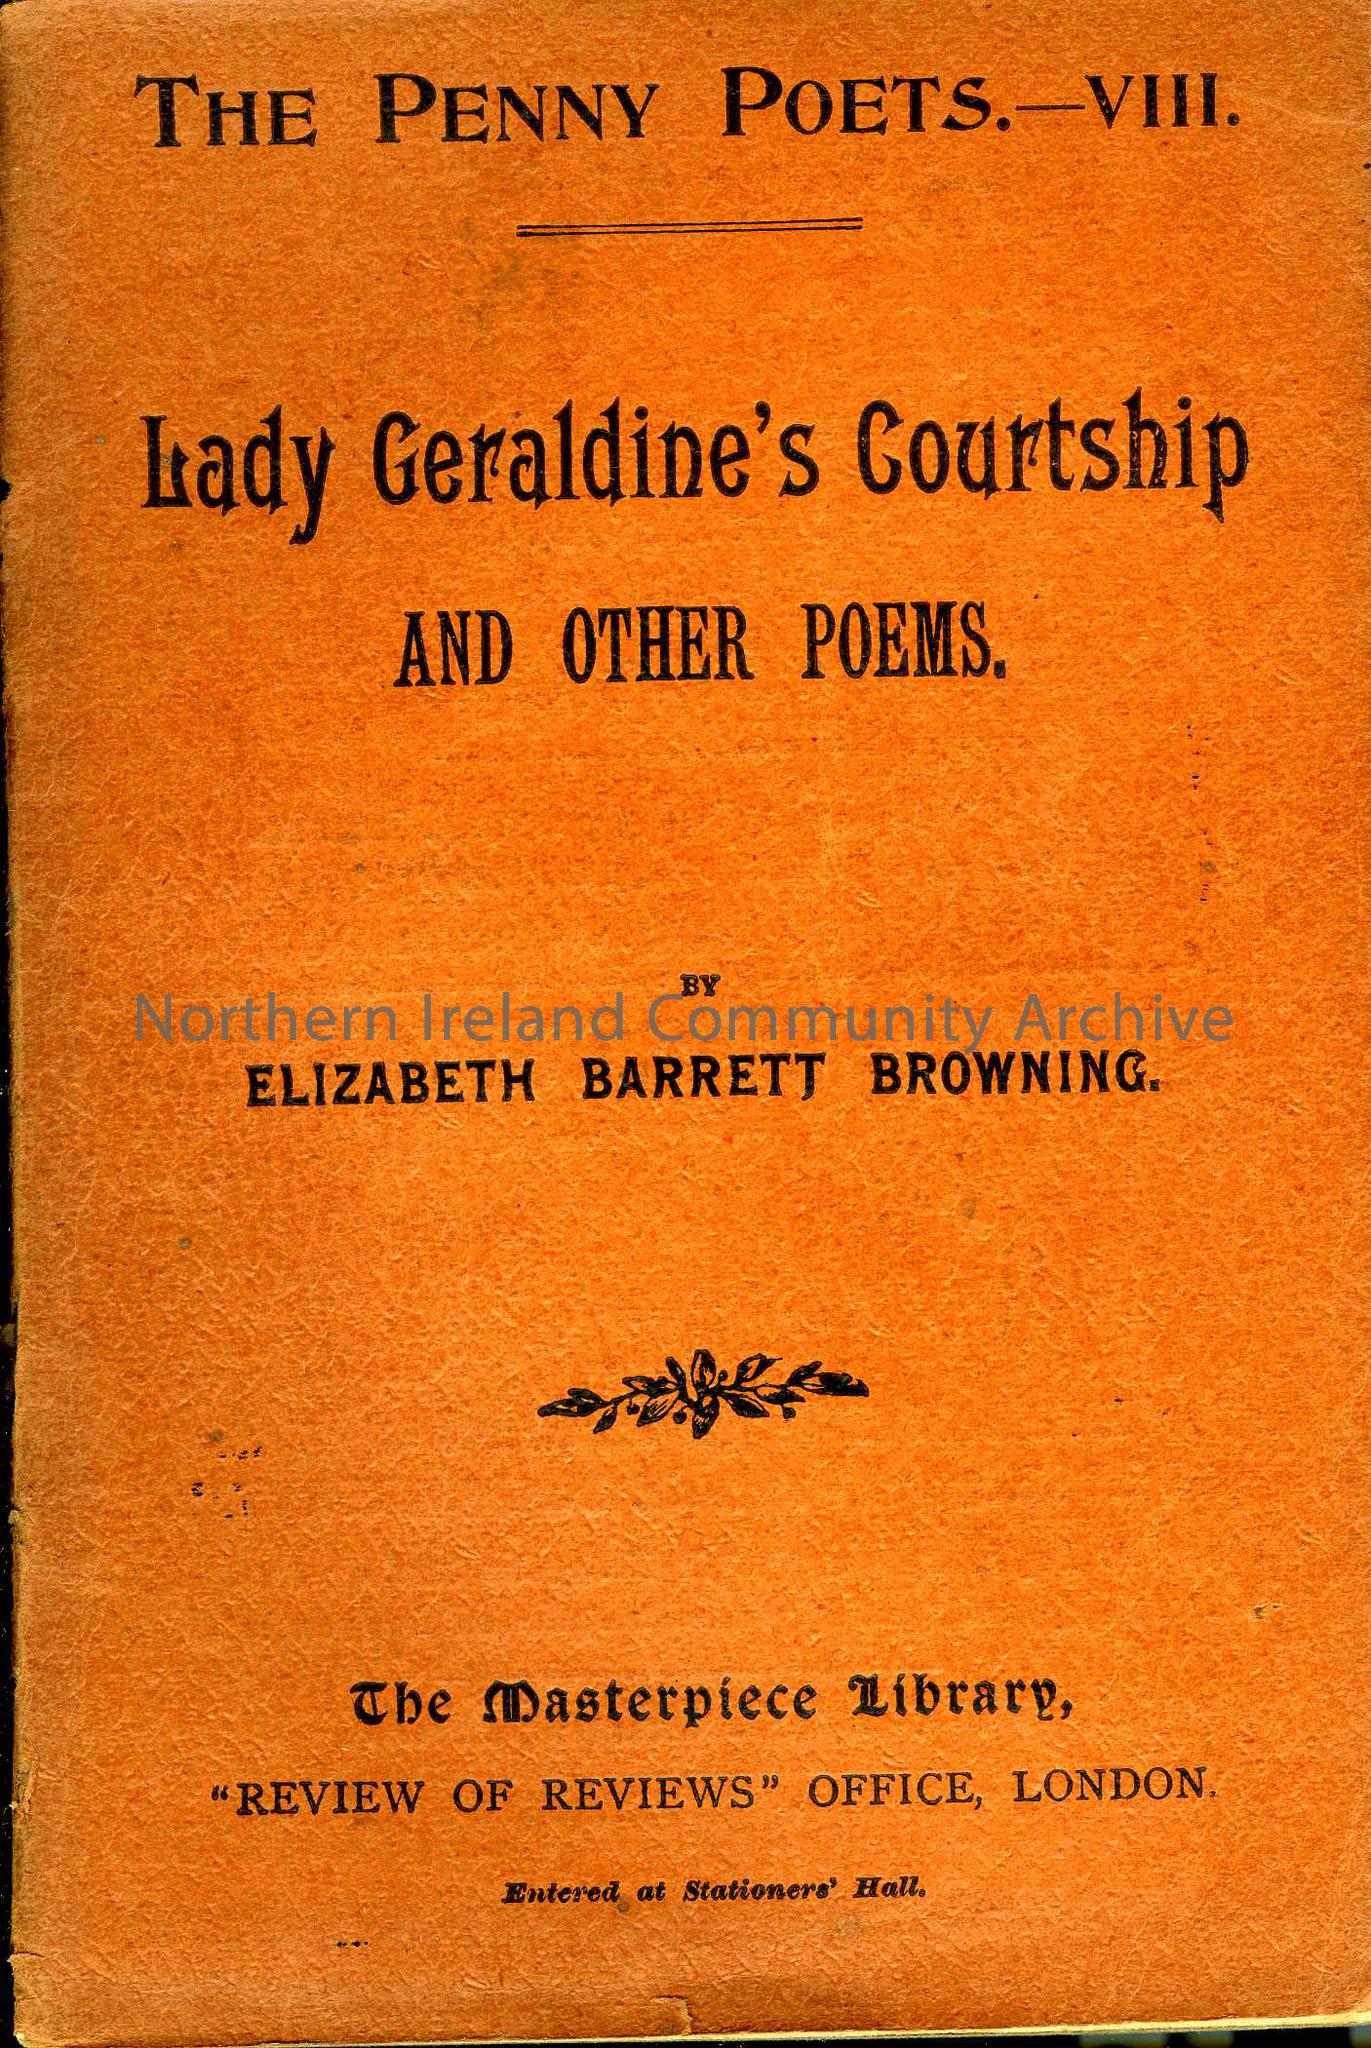 Lady Geraldine’s Courtship and other poems byElizabeth Barrett Browning